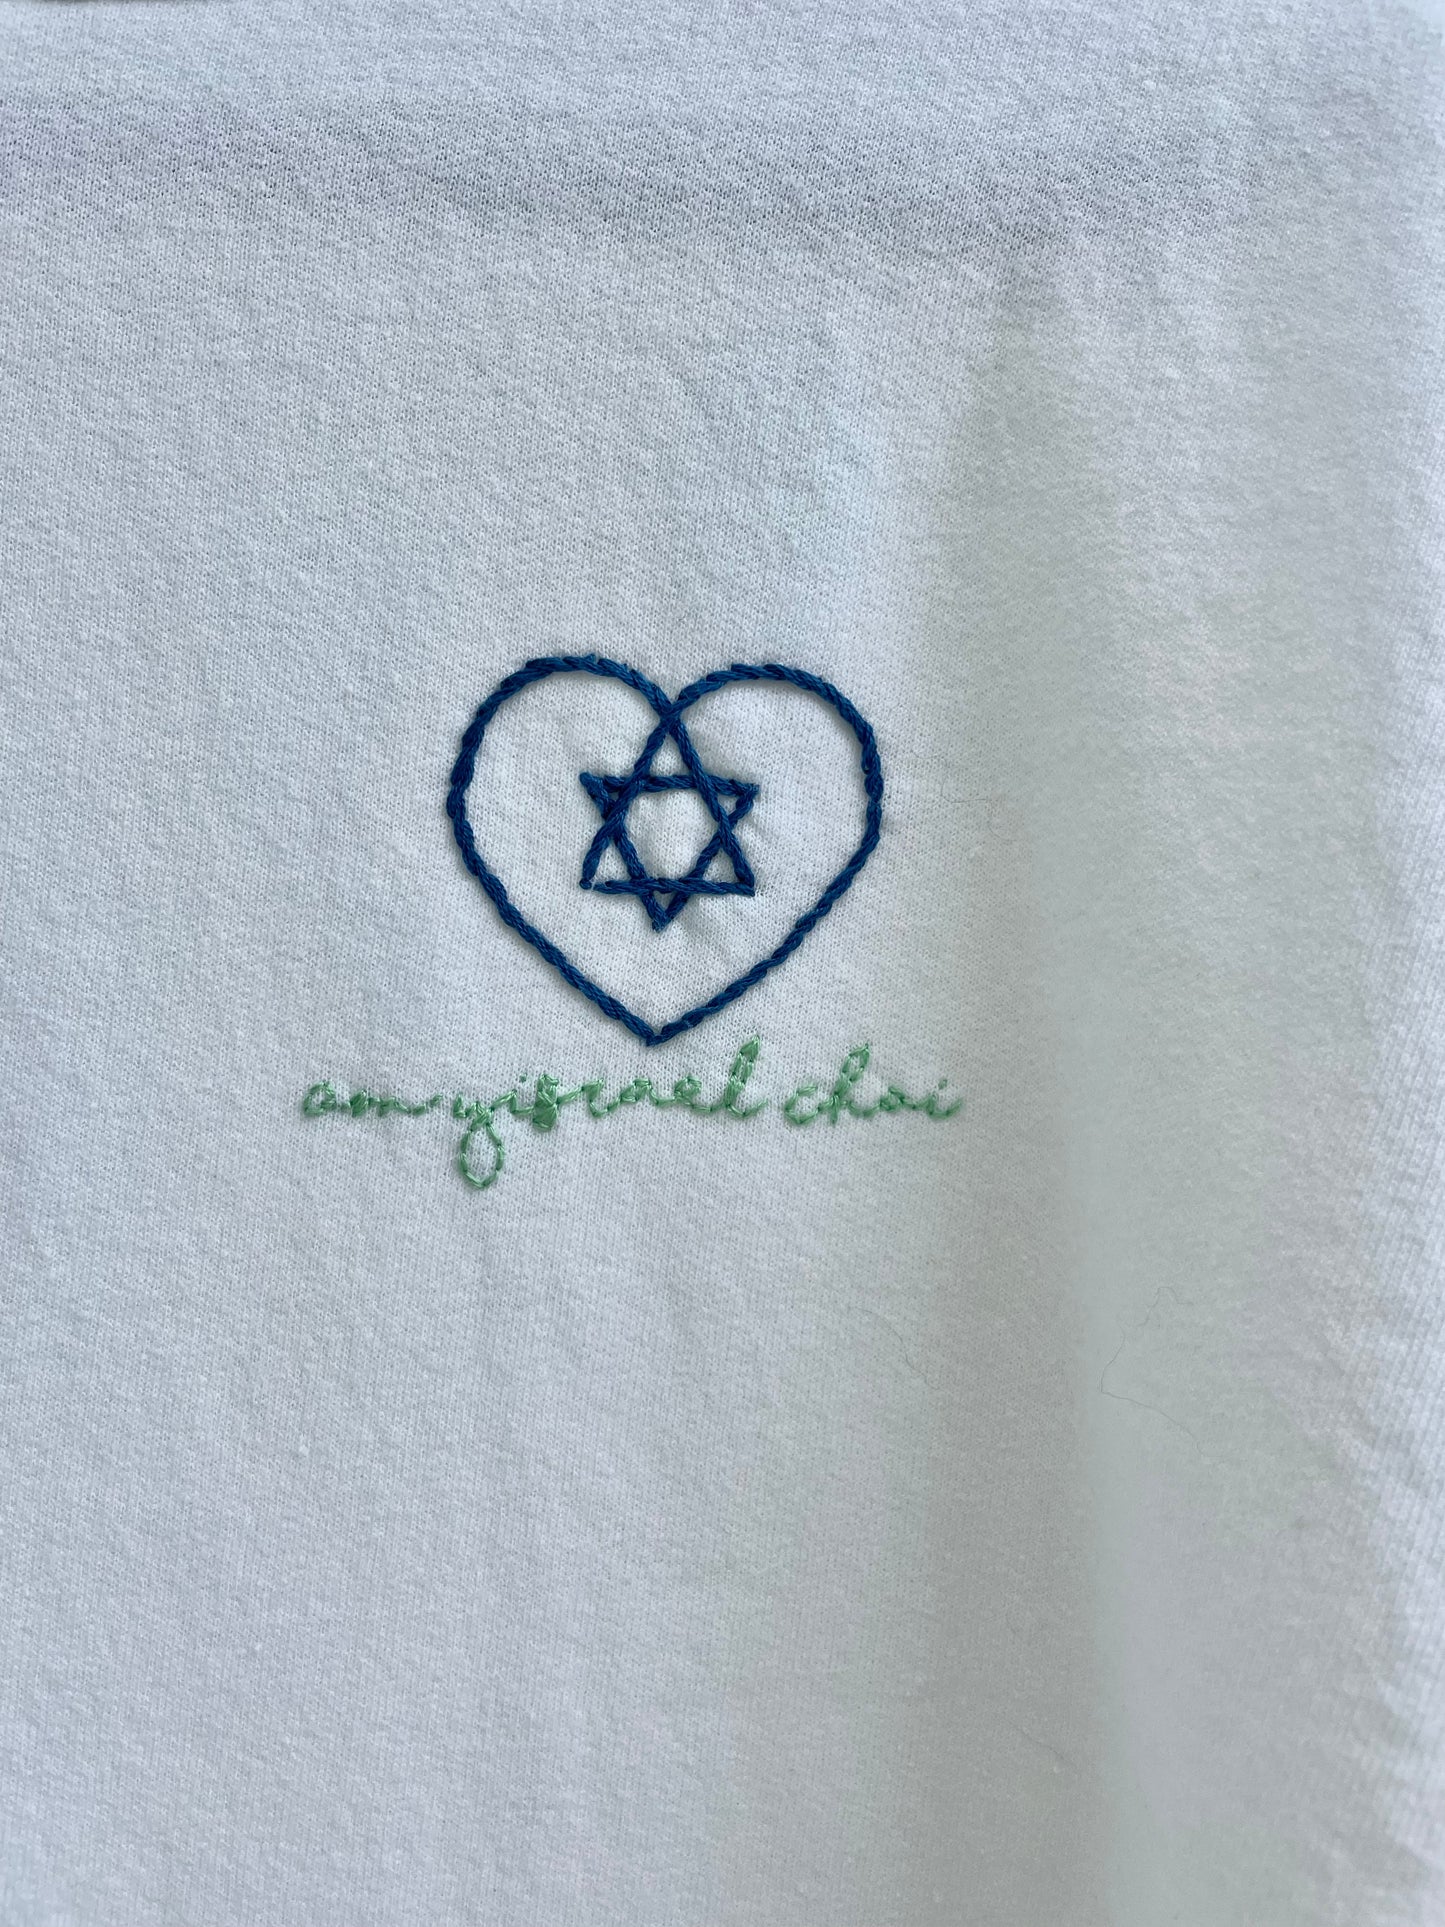 Am Yisrael Chai - Hand Embroidered Sweatshirt - for adults and children